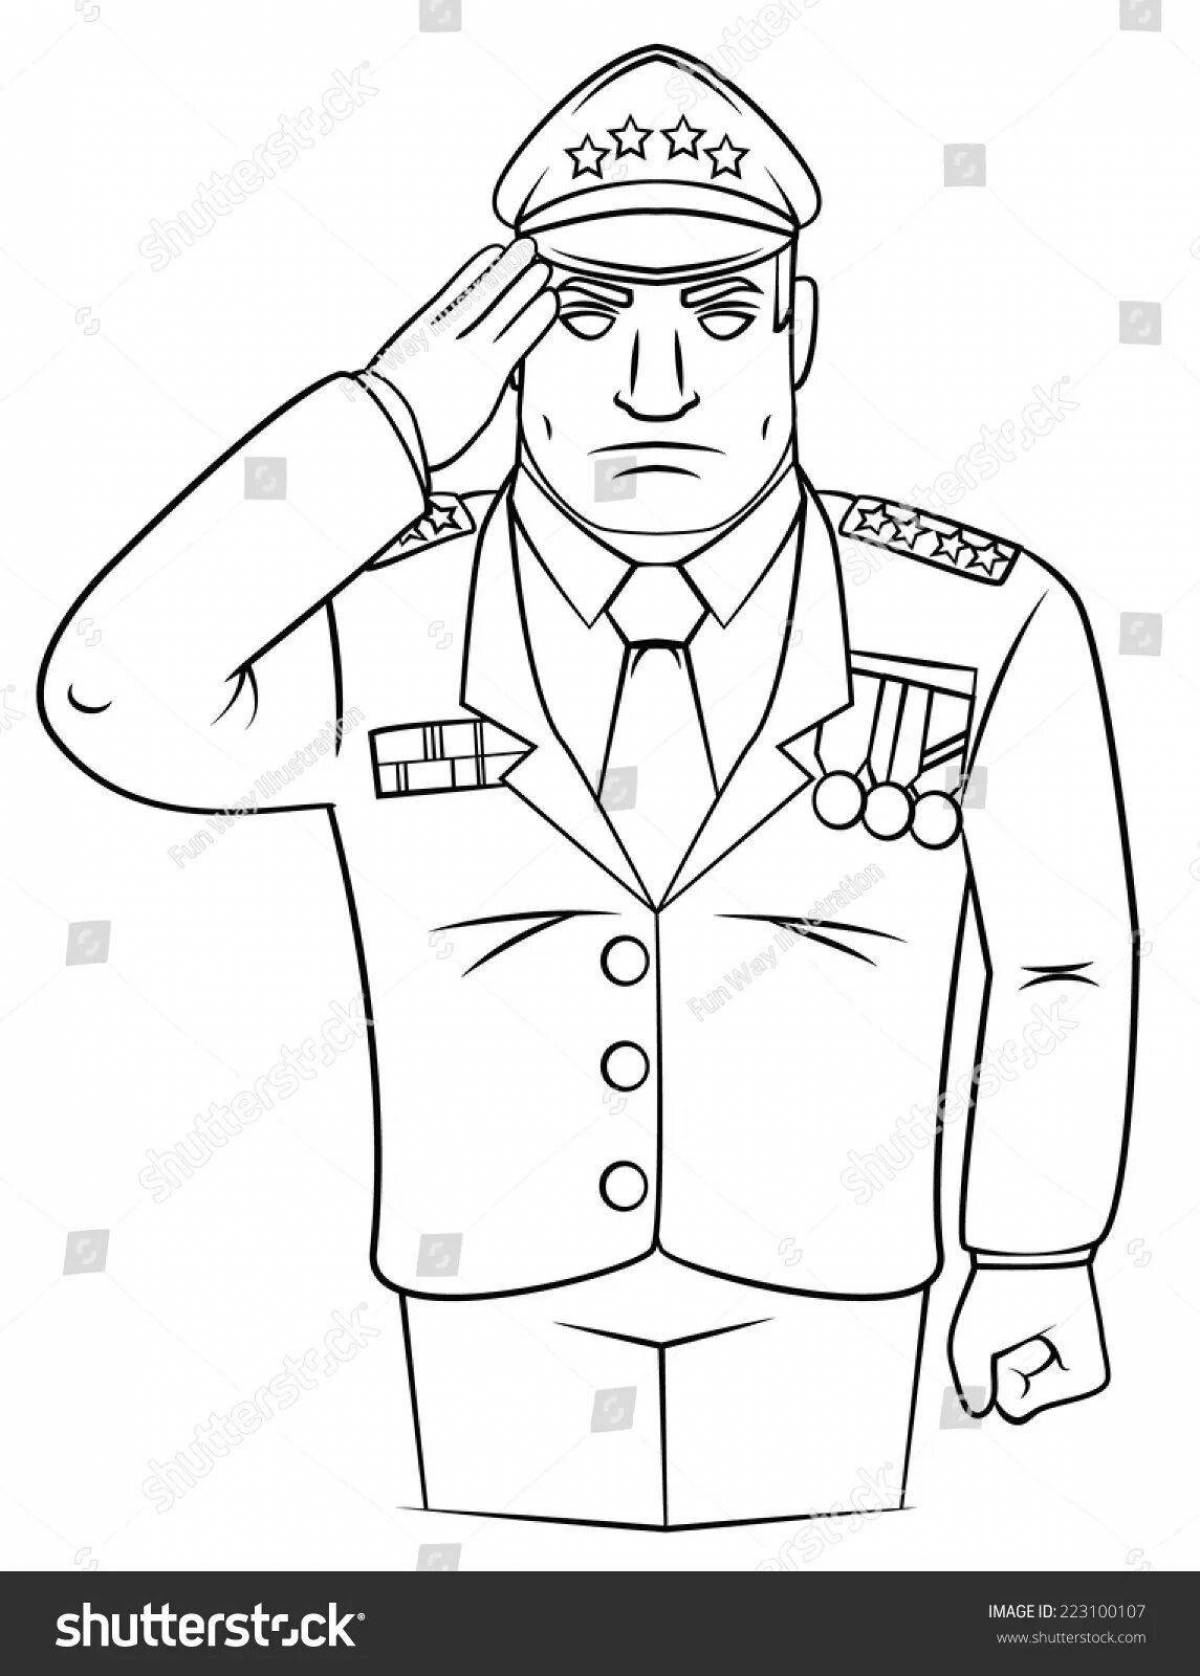 Awesome military portrait coloring page